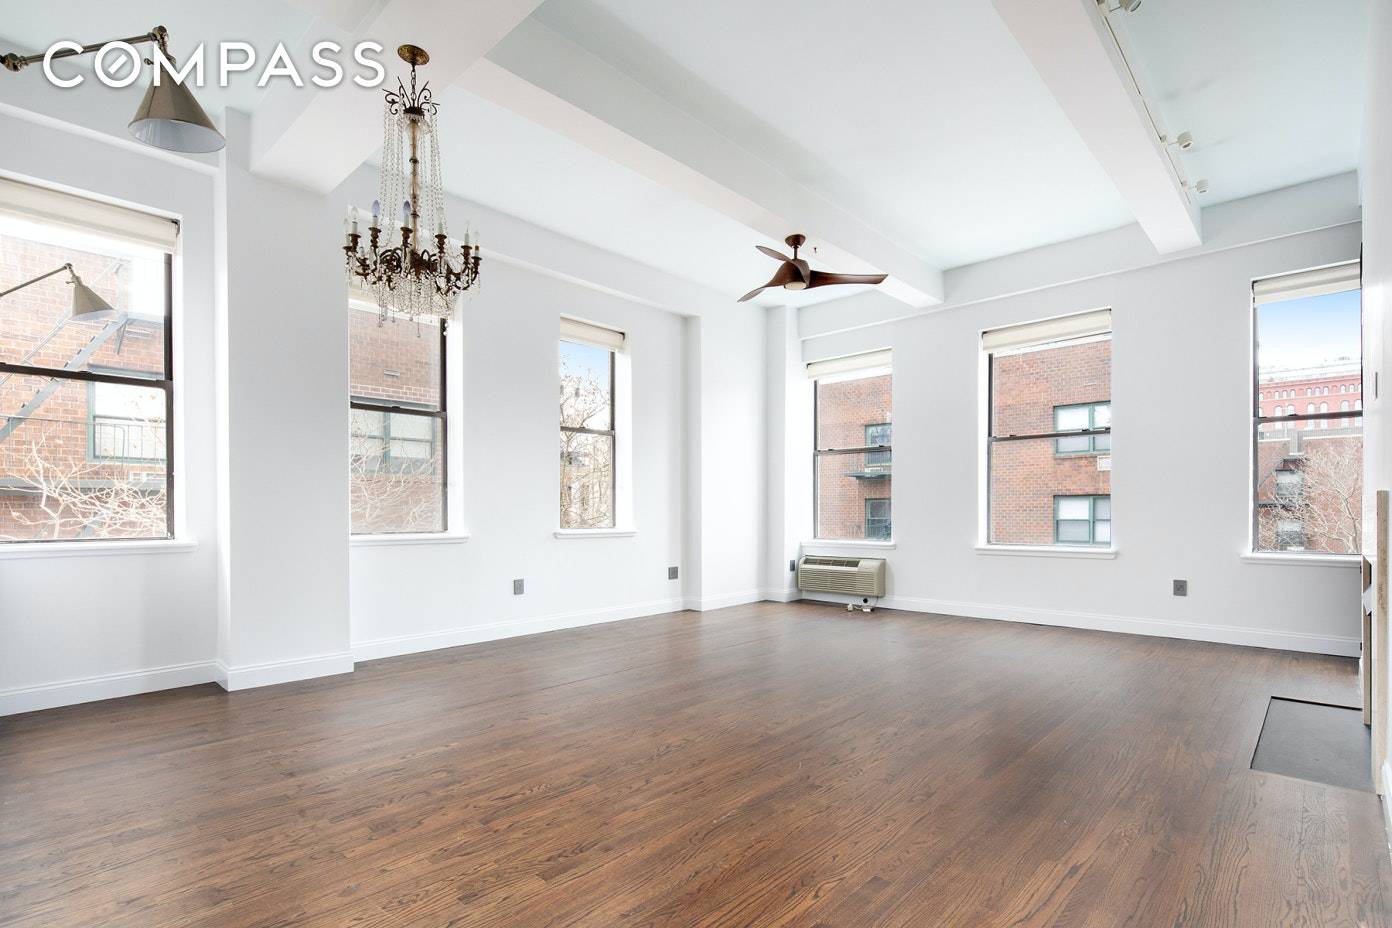 PERRY STREET PERFECTION. Bask in the sunlight in this glorious corner condo loft with towering ceilings, wood burning fireplace, two bedrooms, two baths, and superb storage.